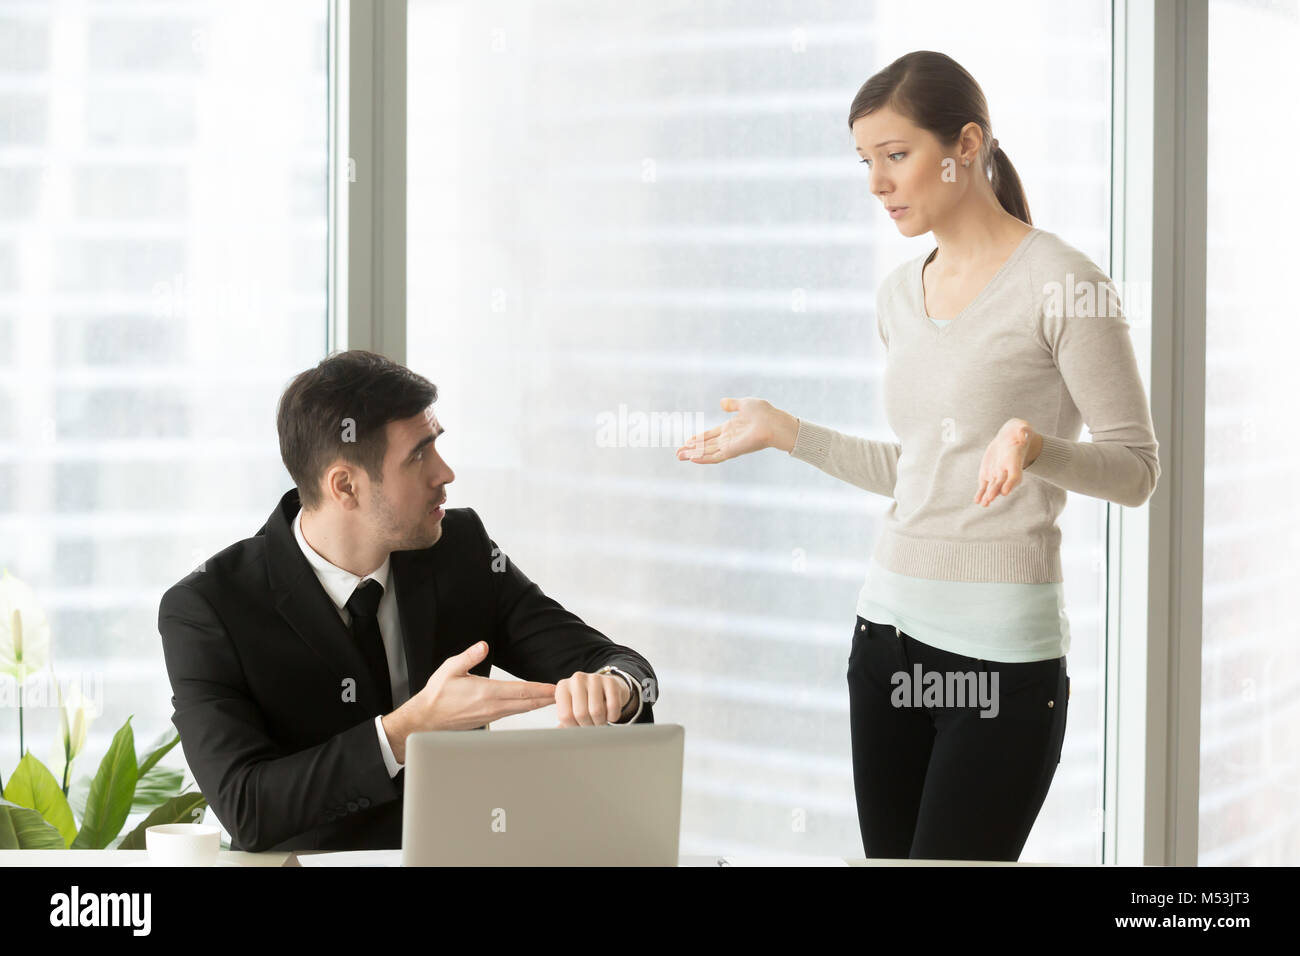 Woman explaining reason for being late for work Stock Photo